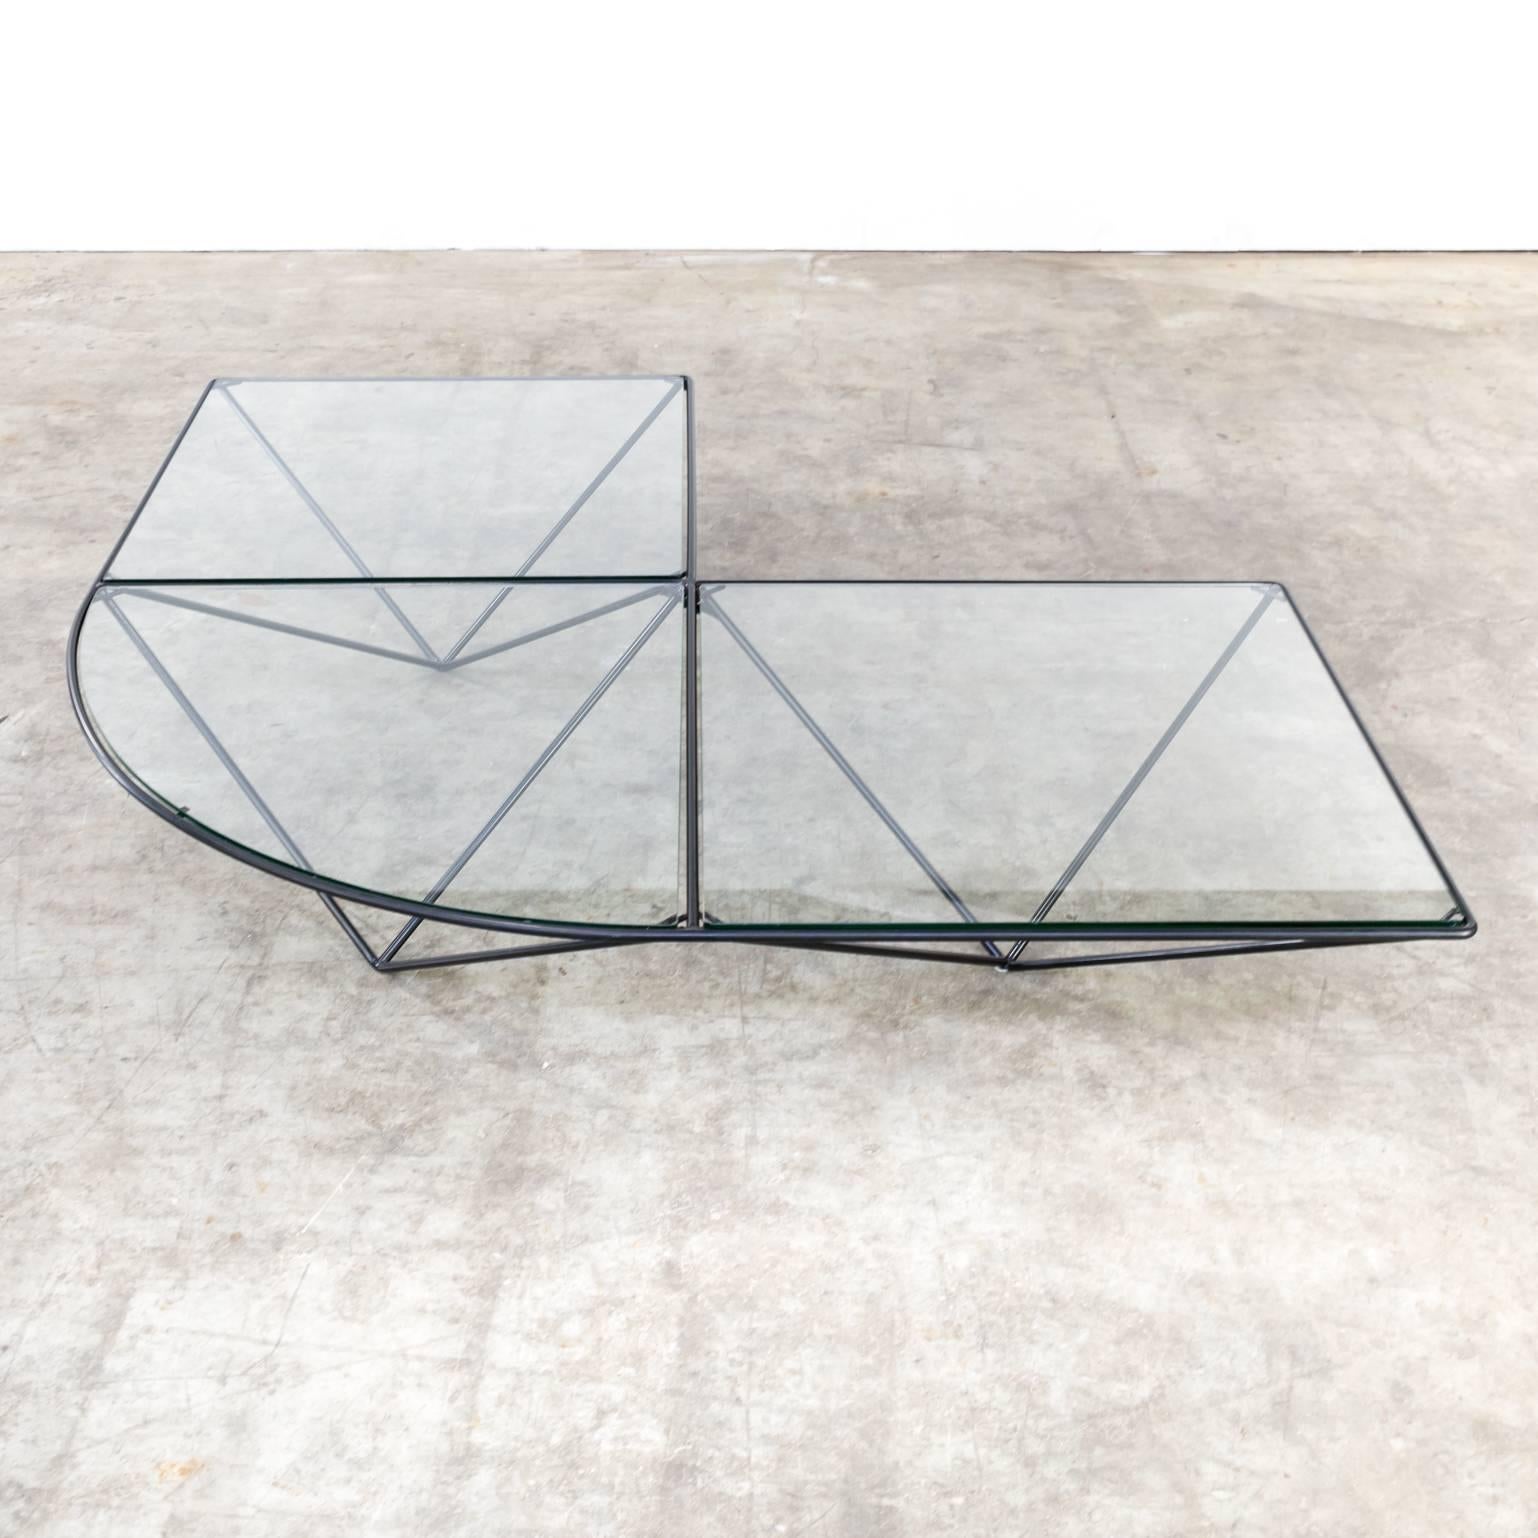 Italian Glass Corner Coffee Table, style of Paolo Piva For Sale